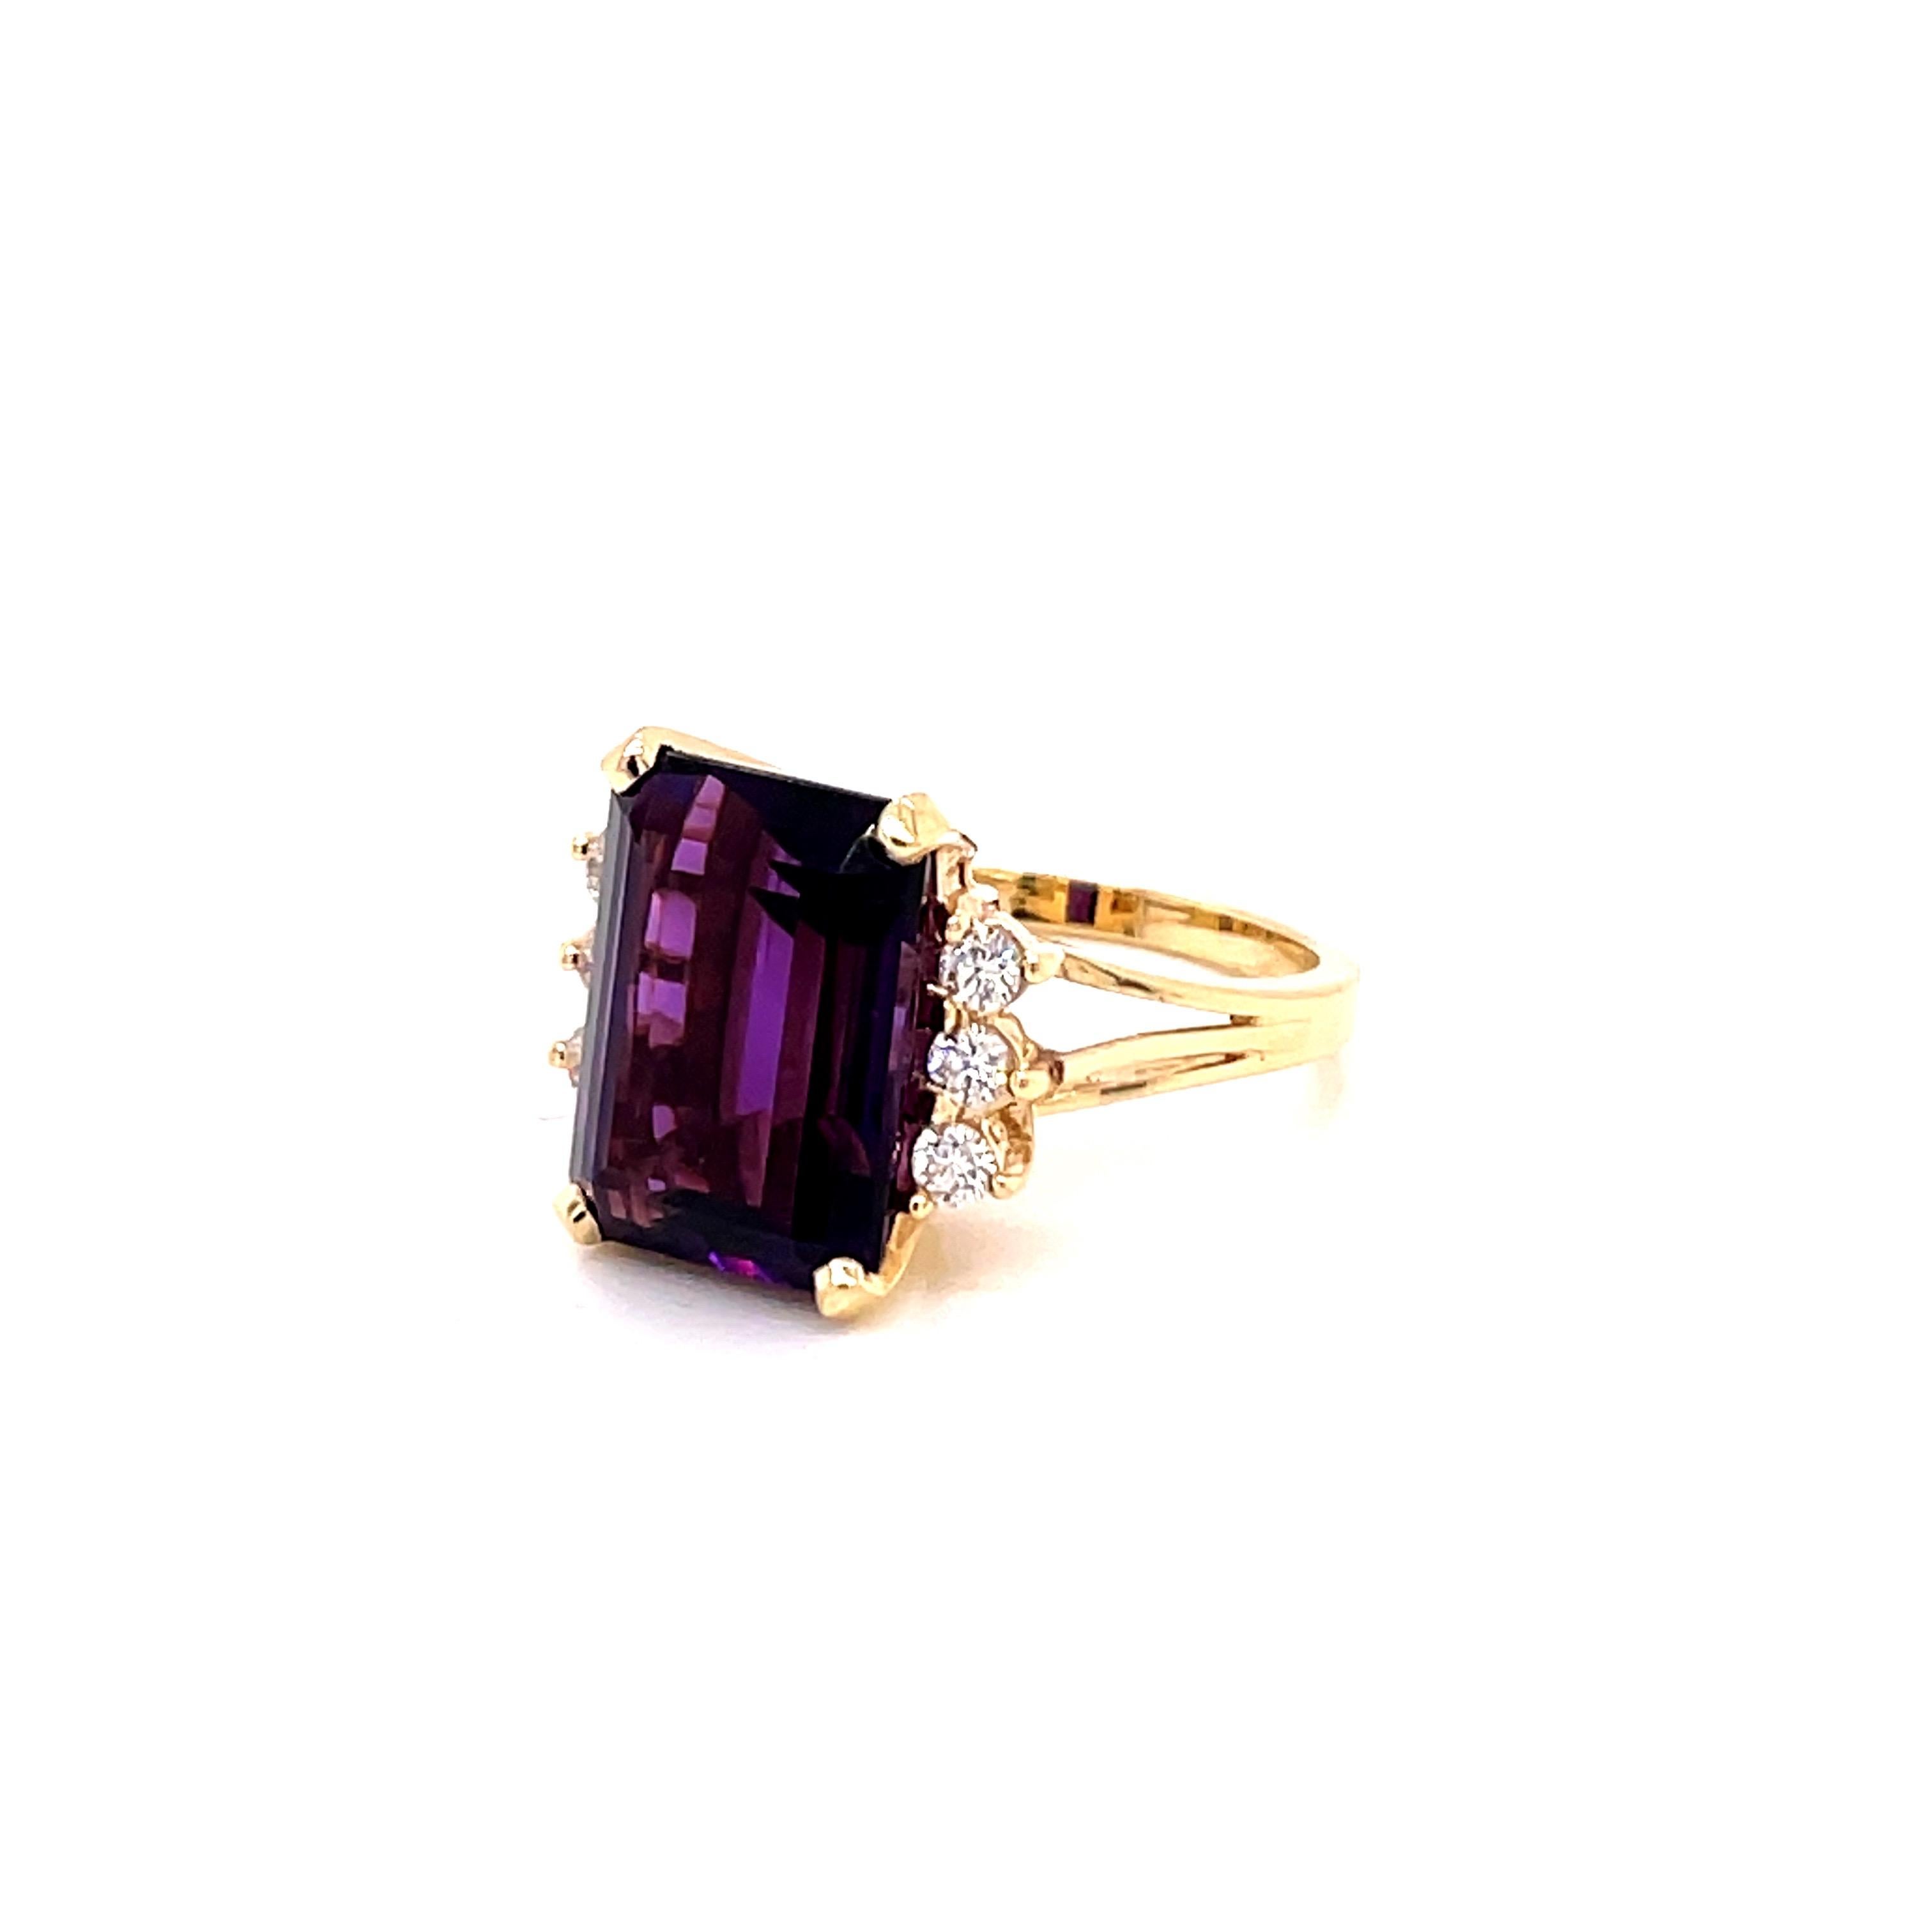 Women's Vintage 1980's 7.35ct Emerald Cut Amethyst Ring with Diamonds